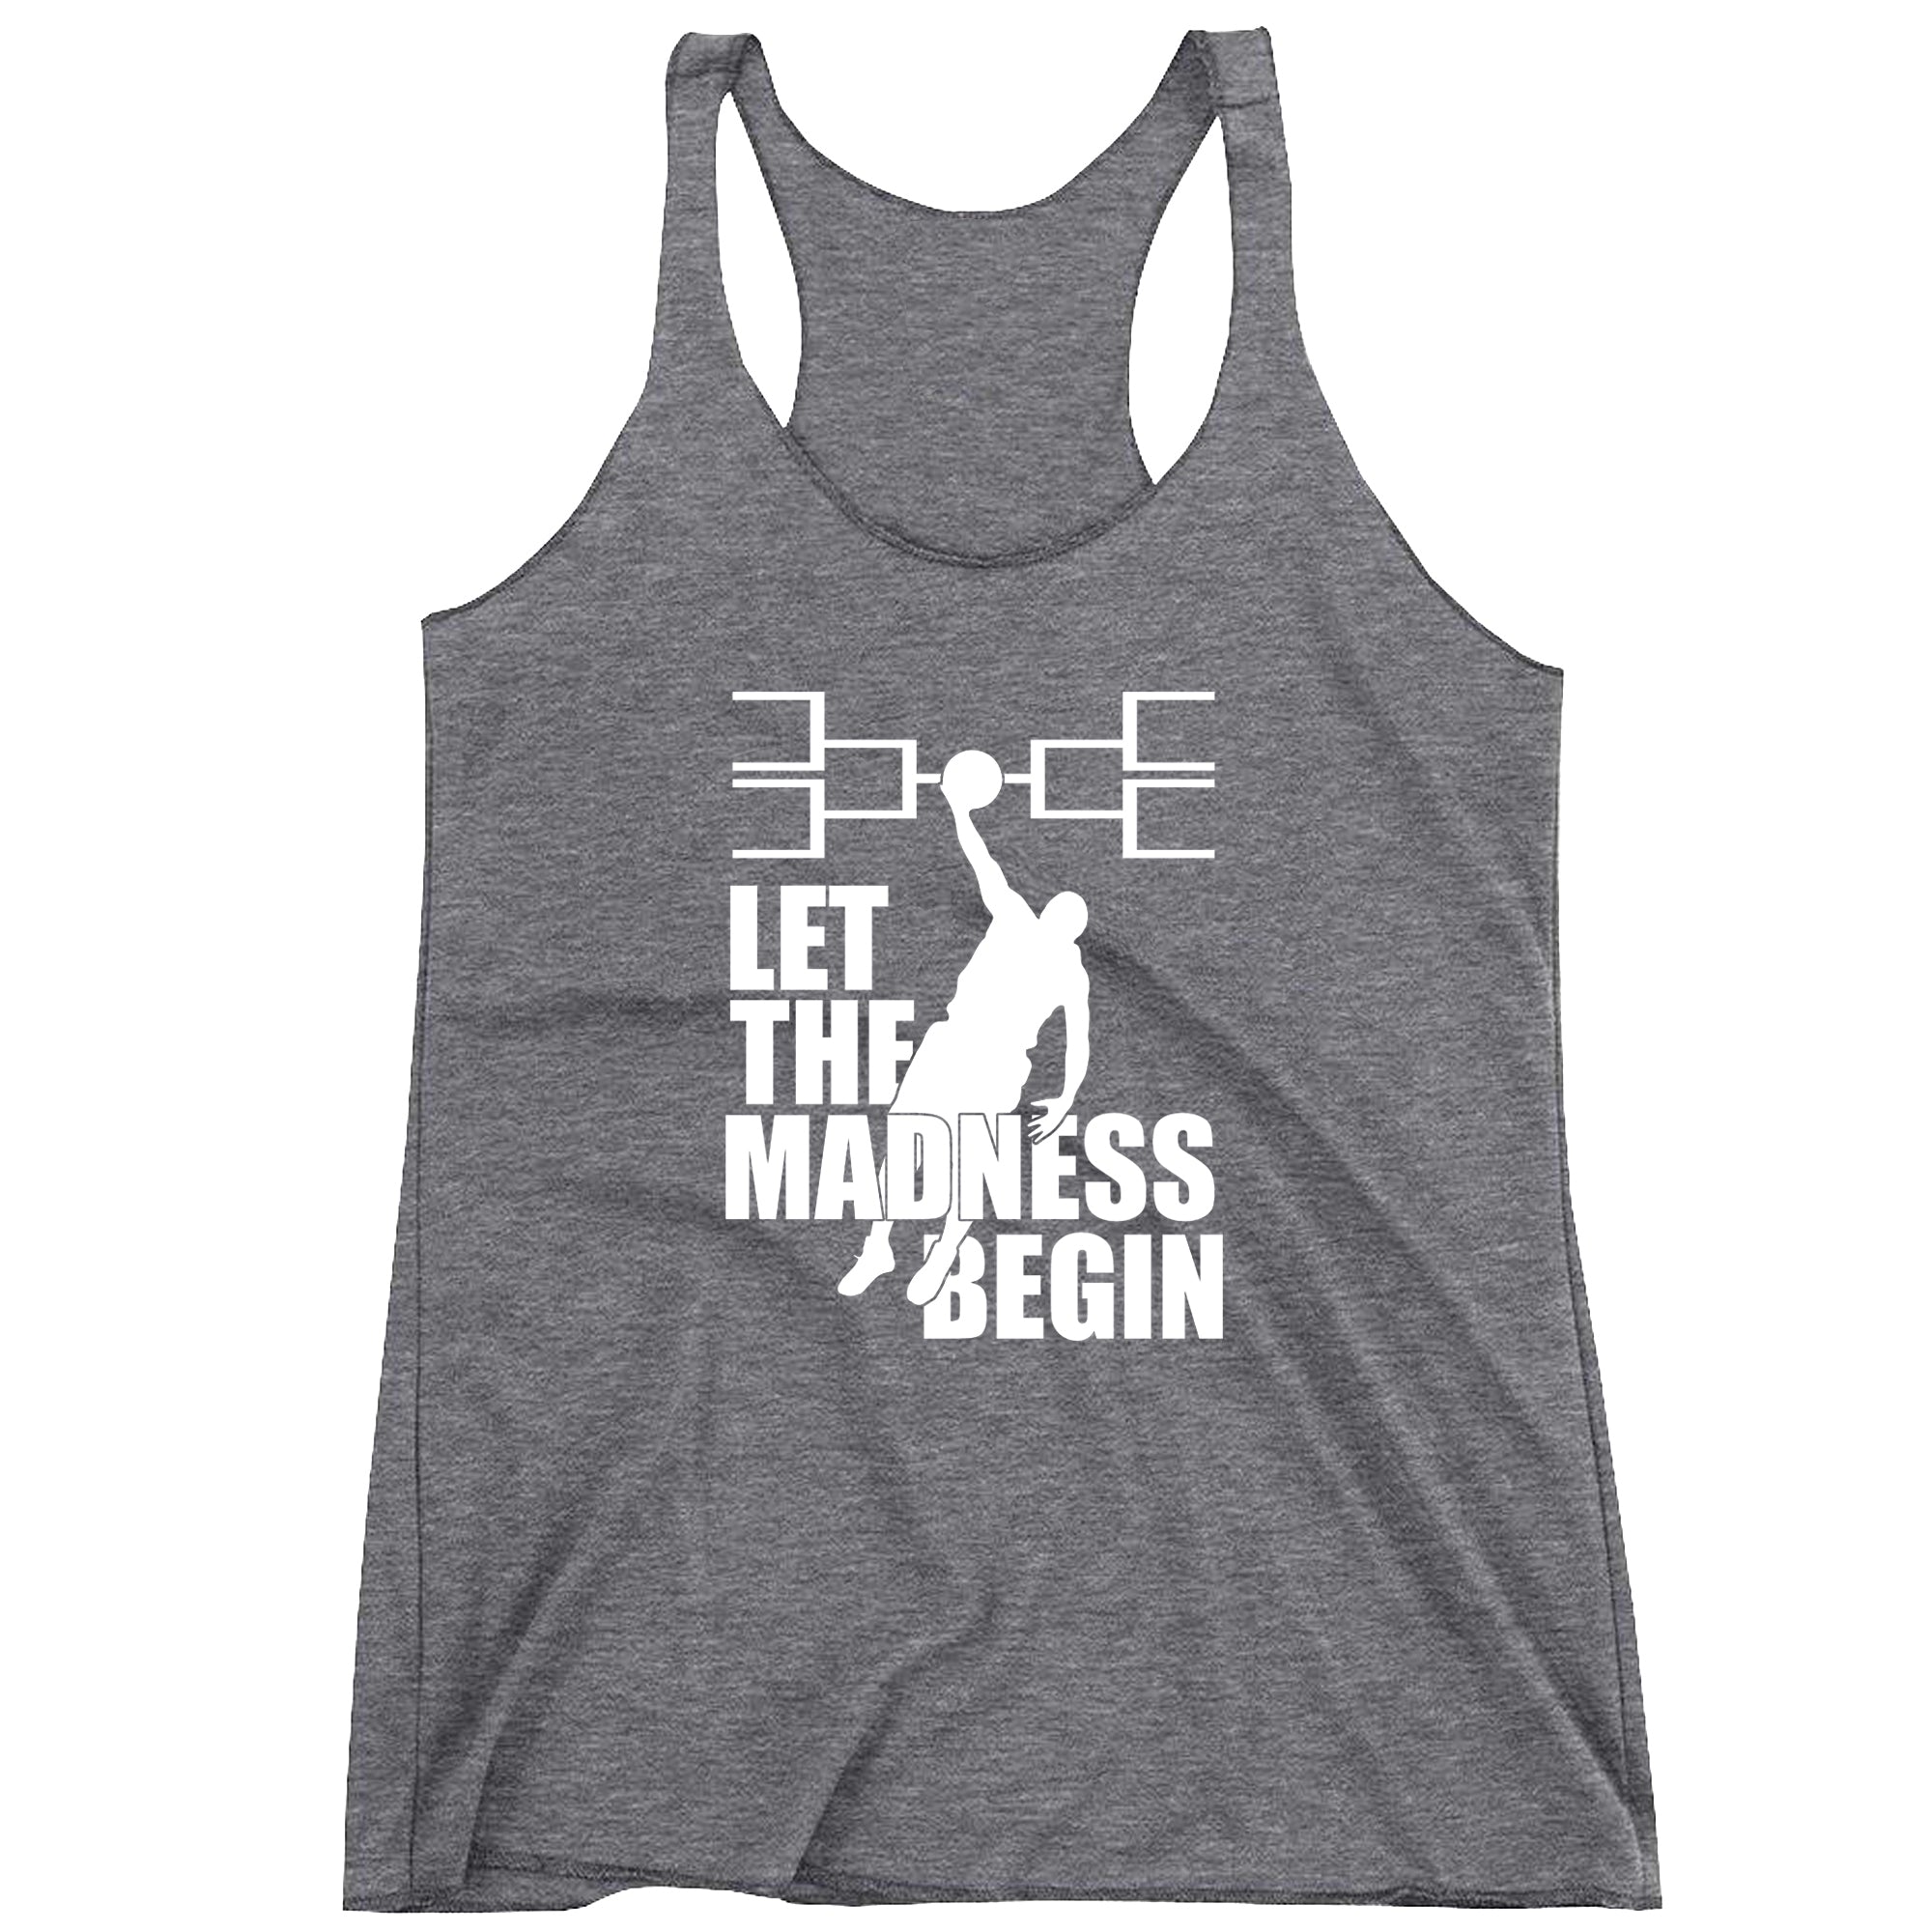 March to College Basketball Madness Women's Racerback Tank